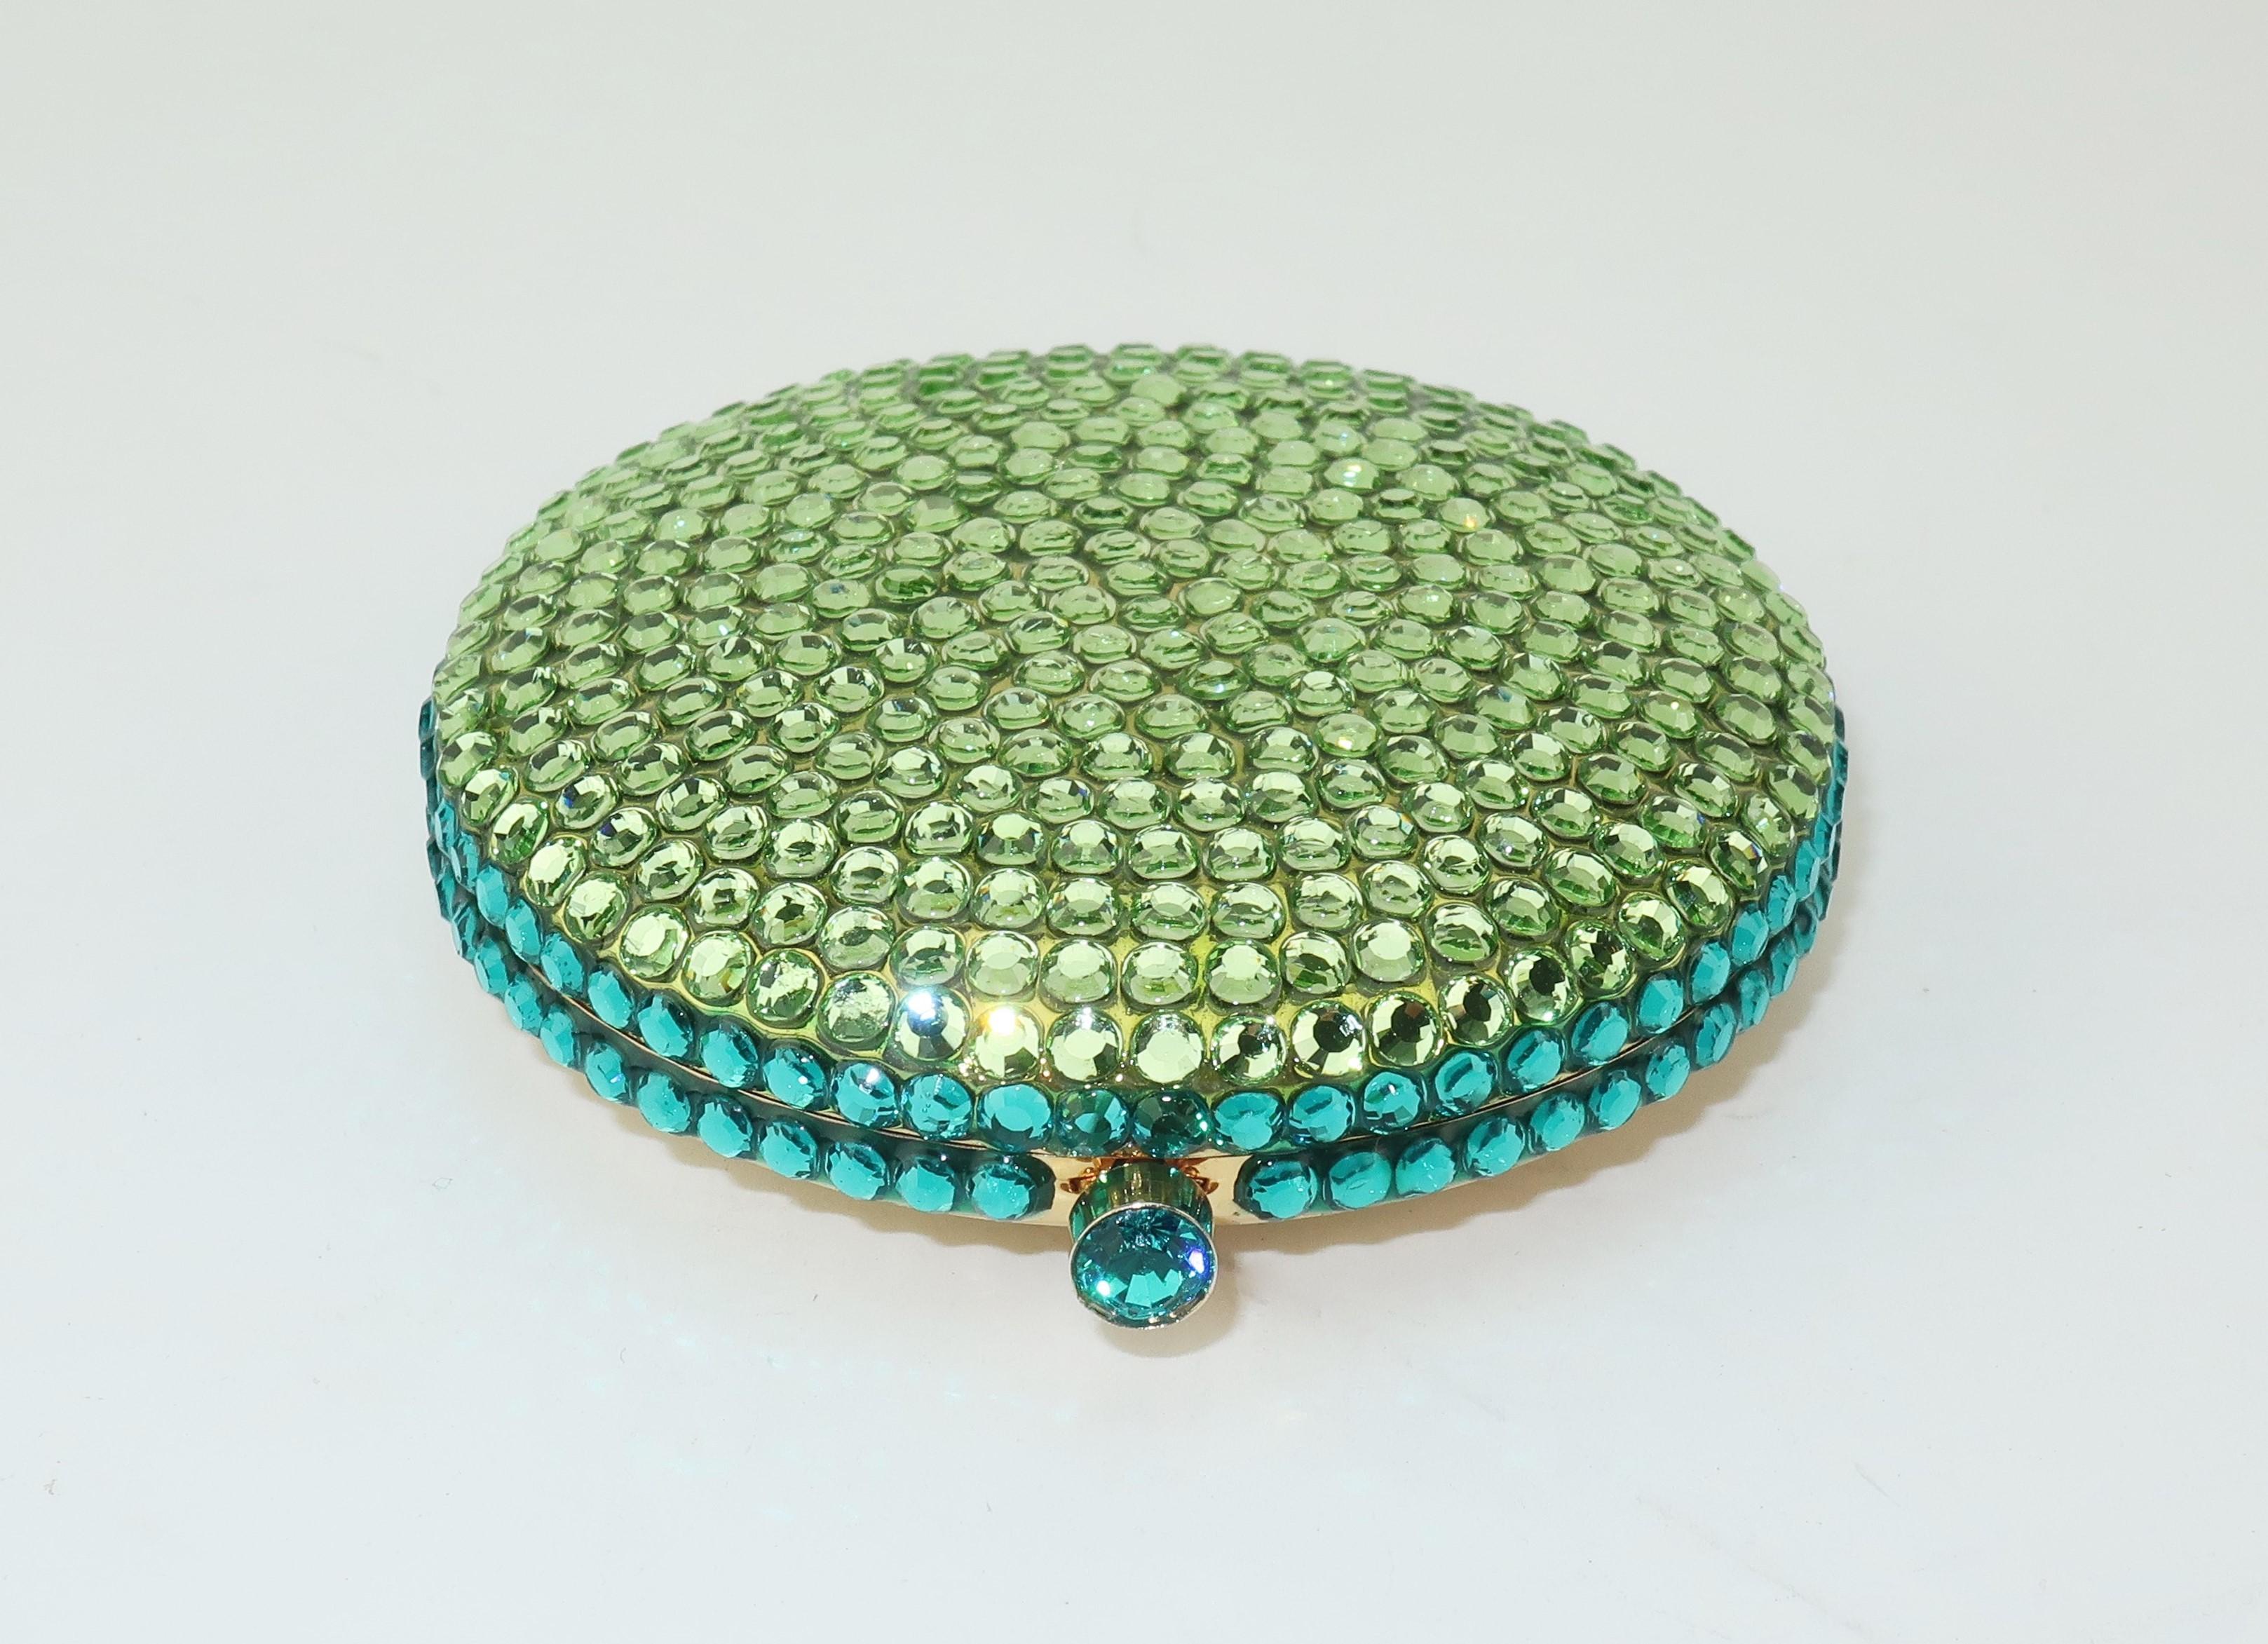 A collectible powder compact by Estee Lauder resembling a yummy macaroon in a vibrant spring green and aqua blue combination all set in a jewelry quality gold tone metal.  The jeweled push button closure opens to reveal a mirror and a refillable